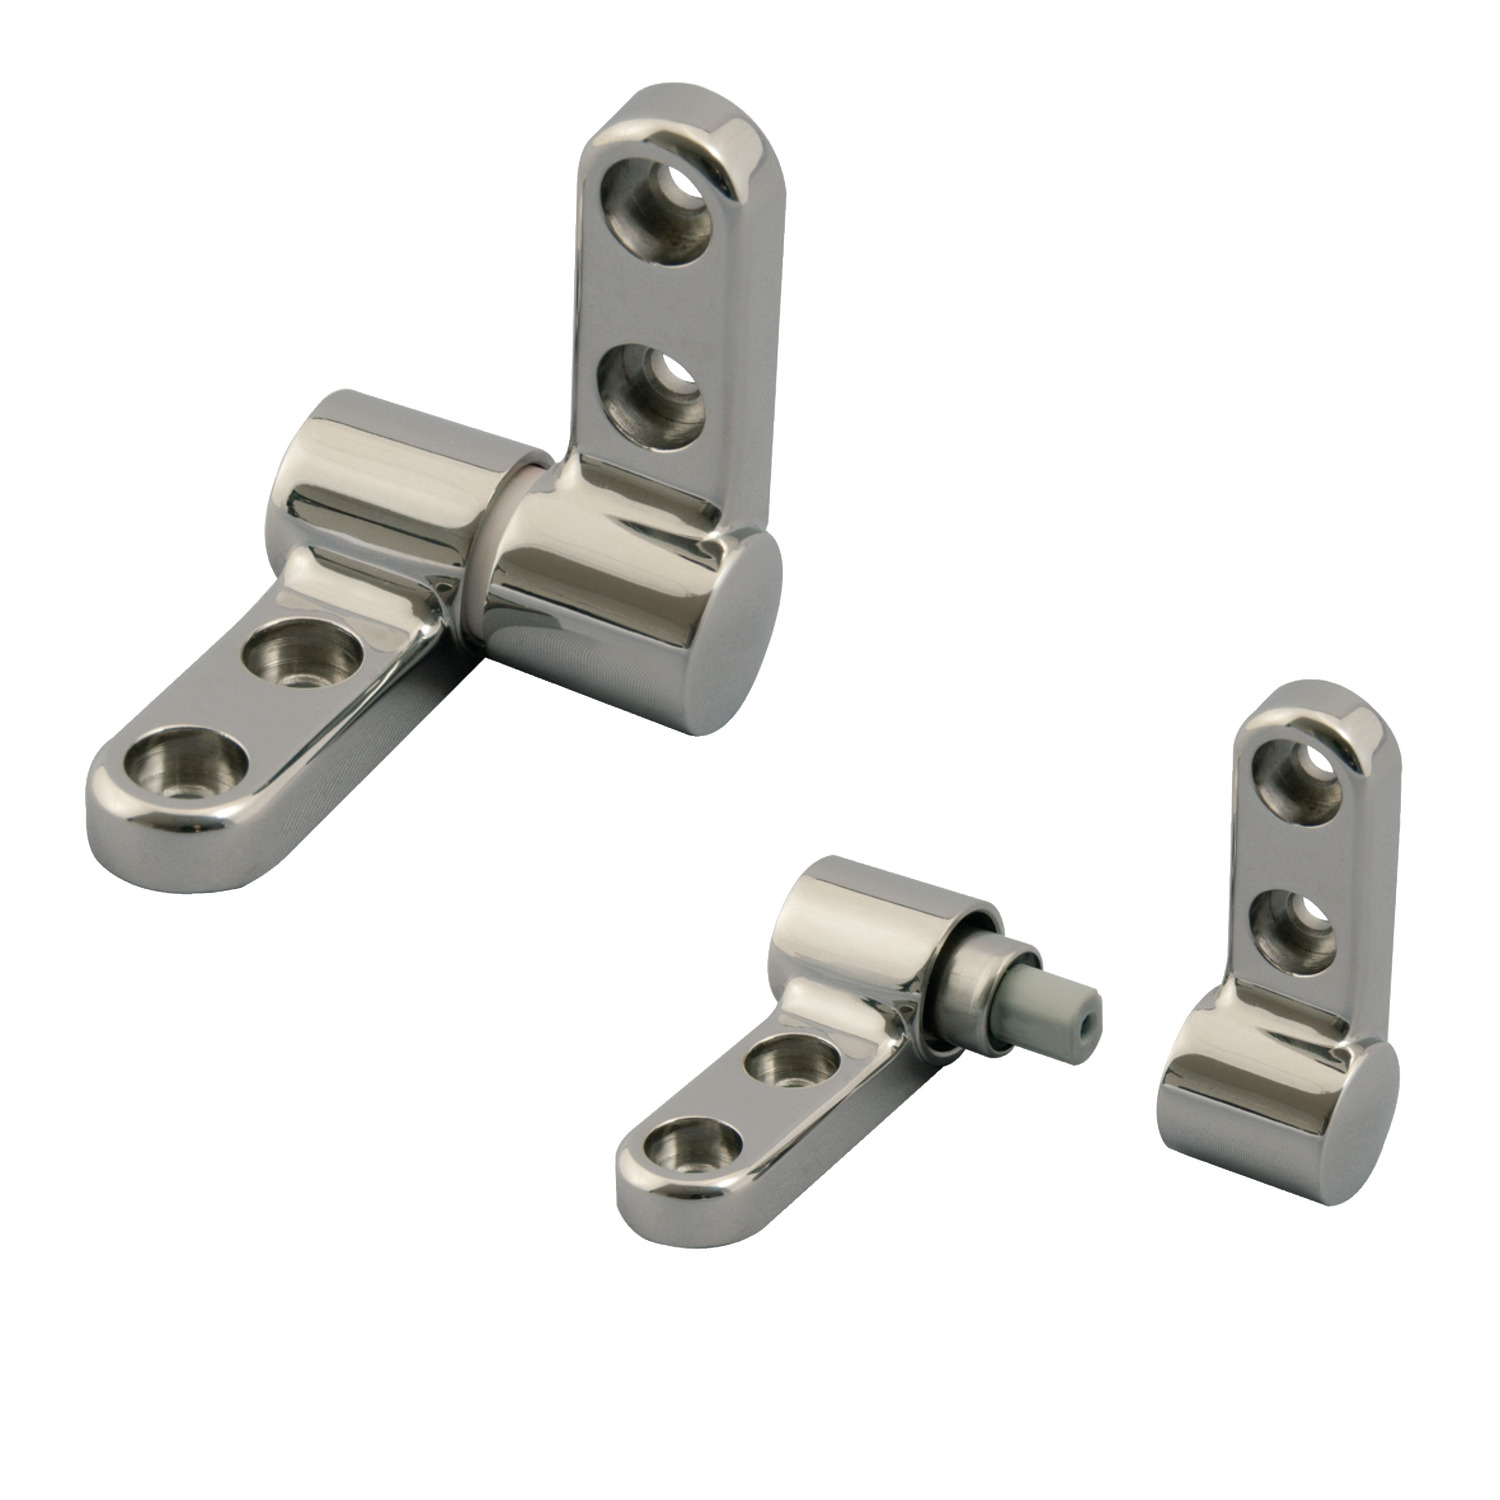 Q1010.AC0050 Soft Closing Hinge Set - two hinges With torque dampers - 115deg.  operating angle. Contains 1 off Anti-Clockwise & 1 off Clockwise - 30-51 Torque Kgf/cm